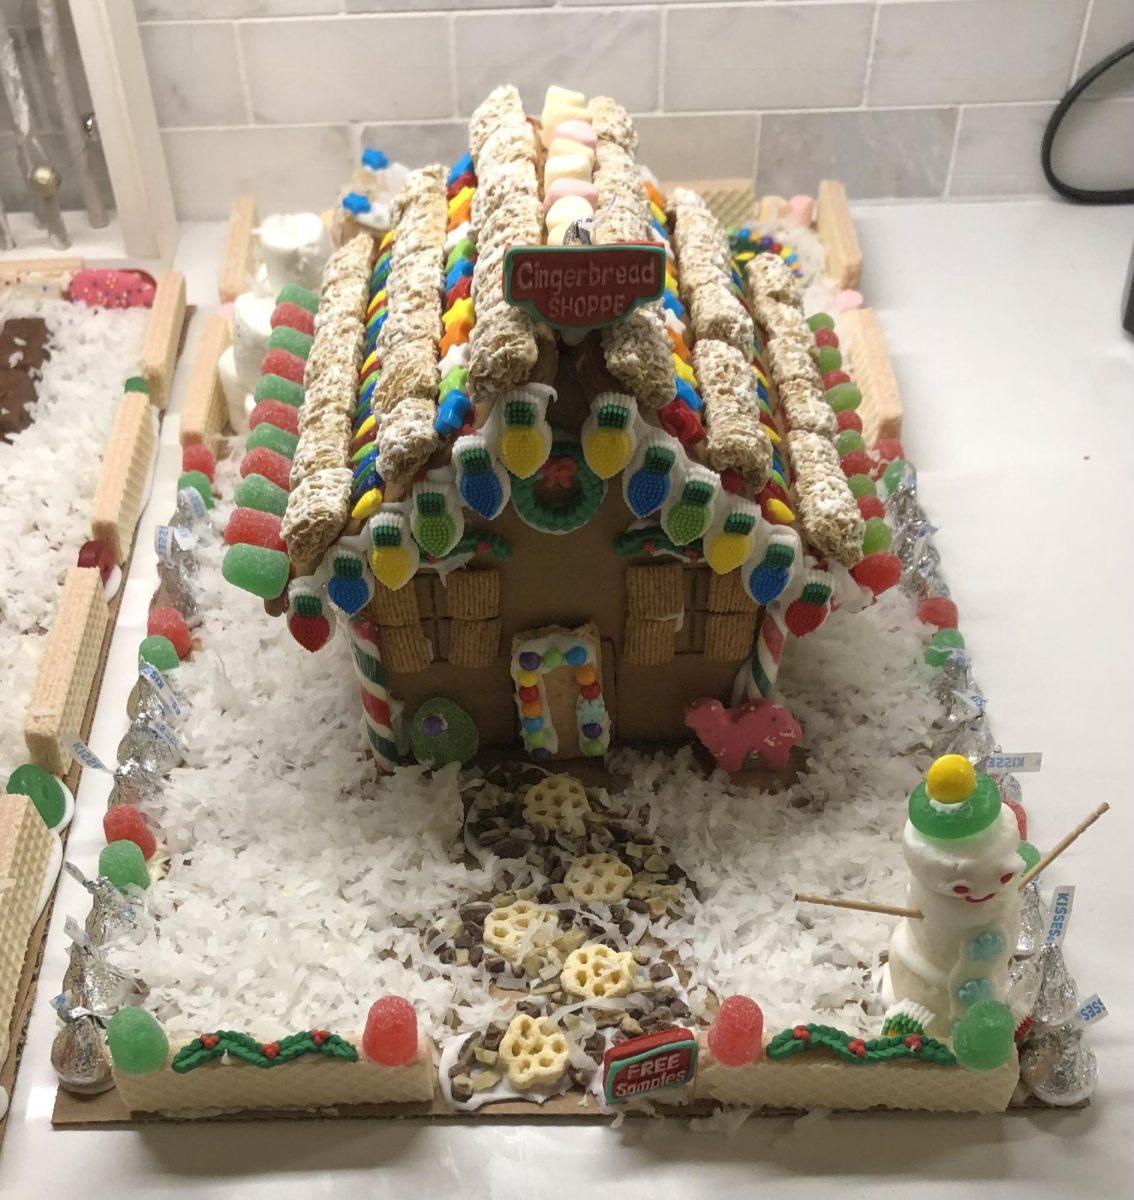 A cereal that works well for the roof of the house is Shredded Wheat, perfect for a snowy effect. There are also windows made from Golden Grahams and a path made from honeycomb cookies. 